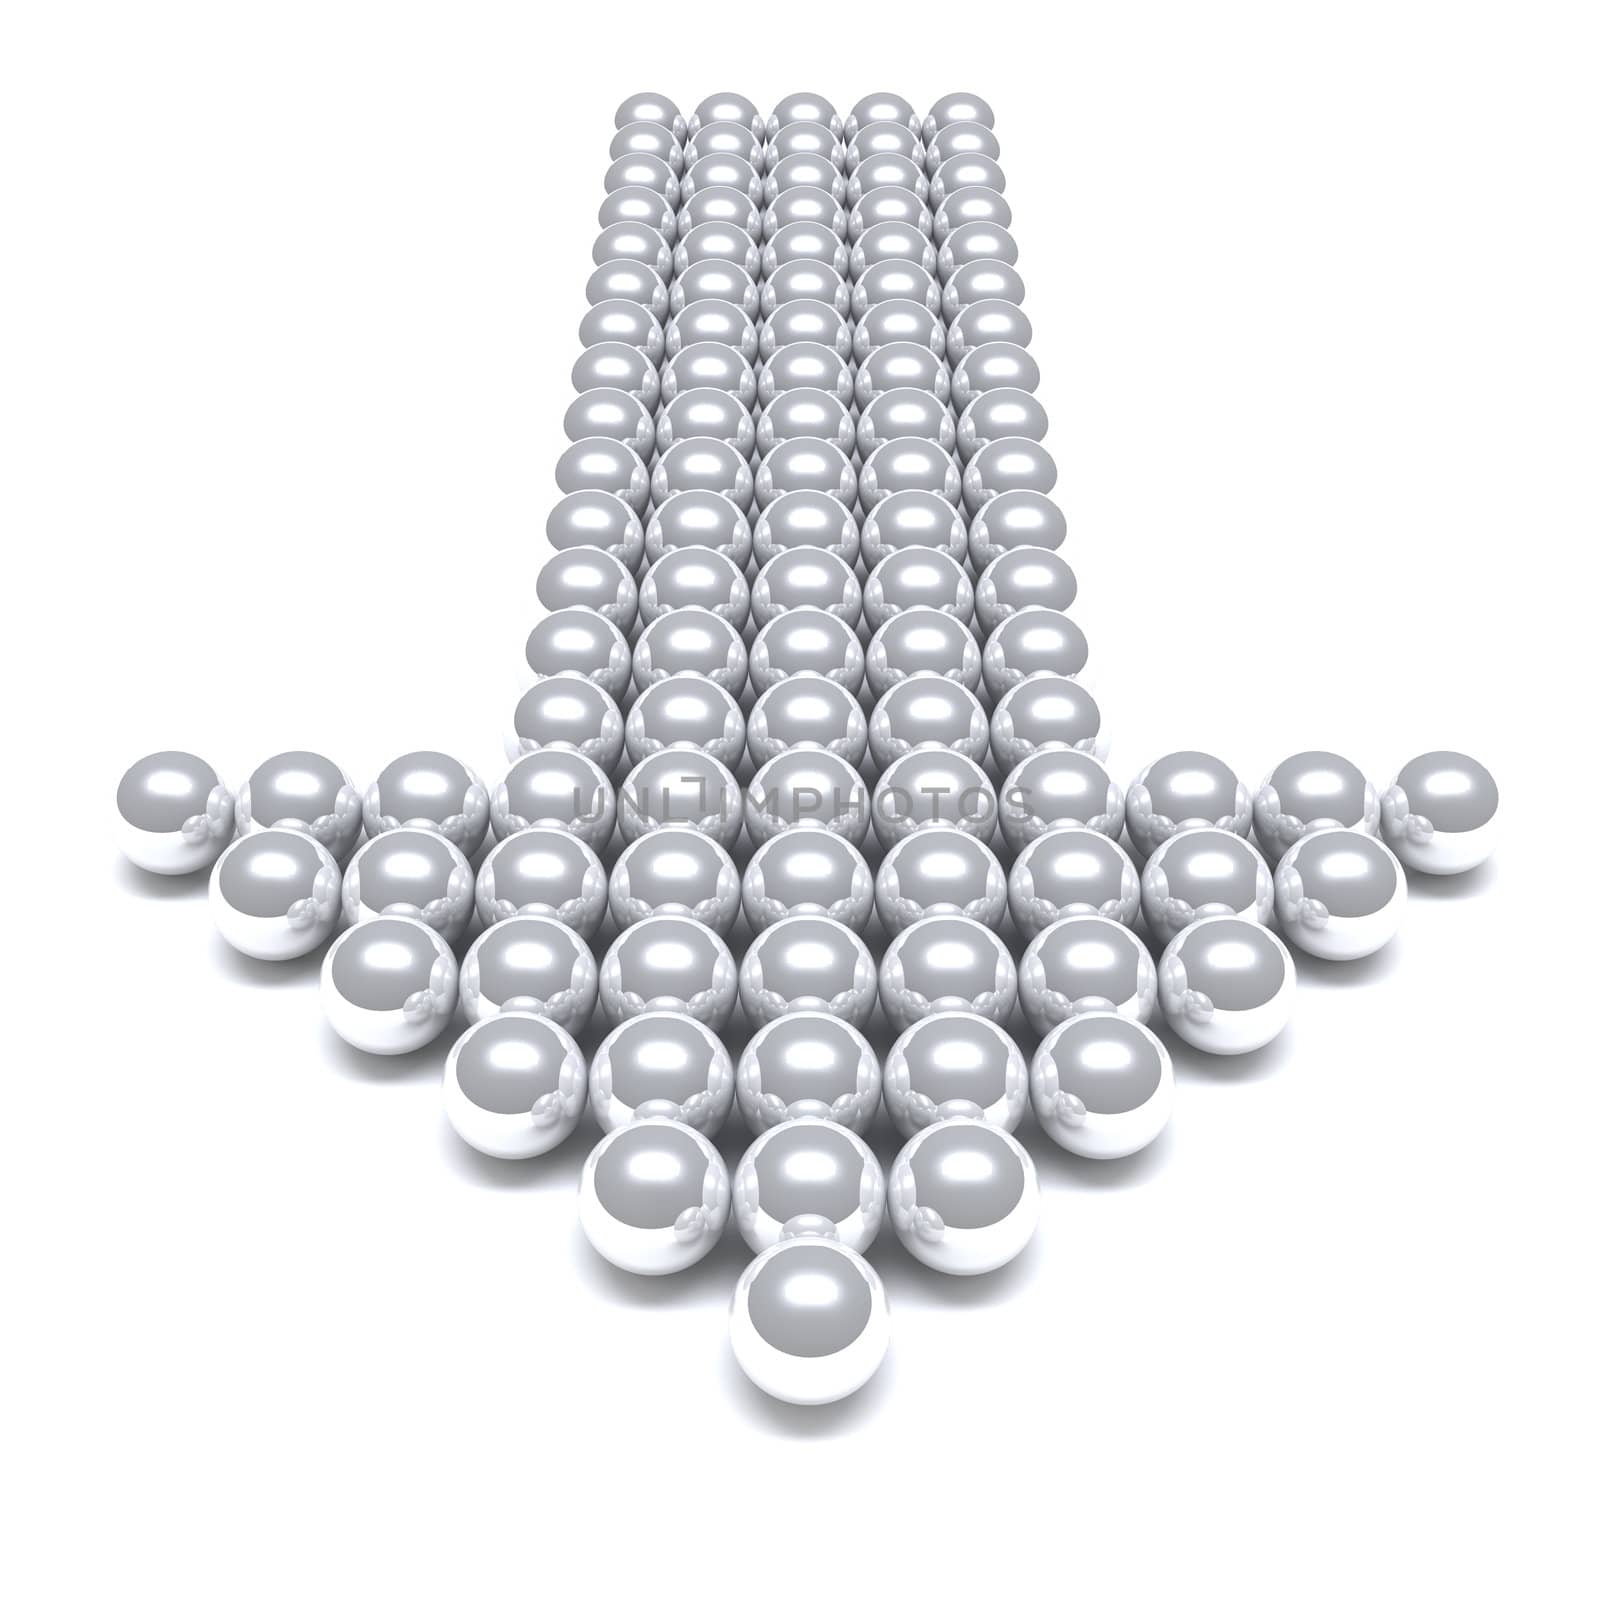 Grey arrow consisting of metal balls on a white background